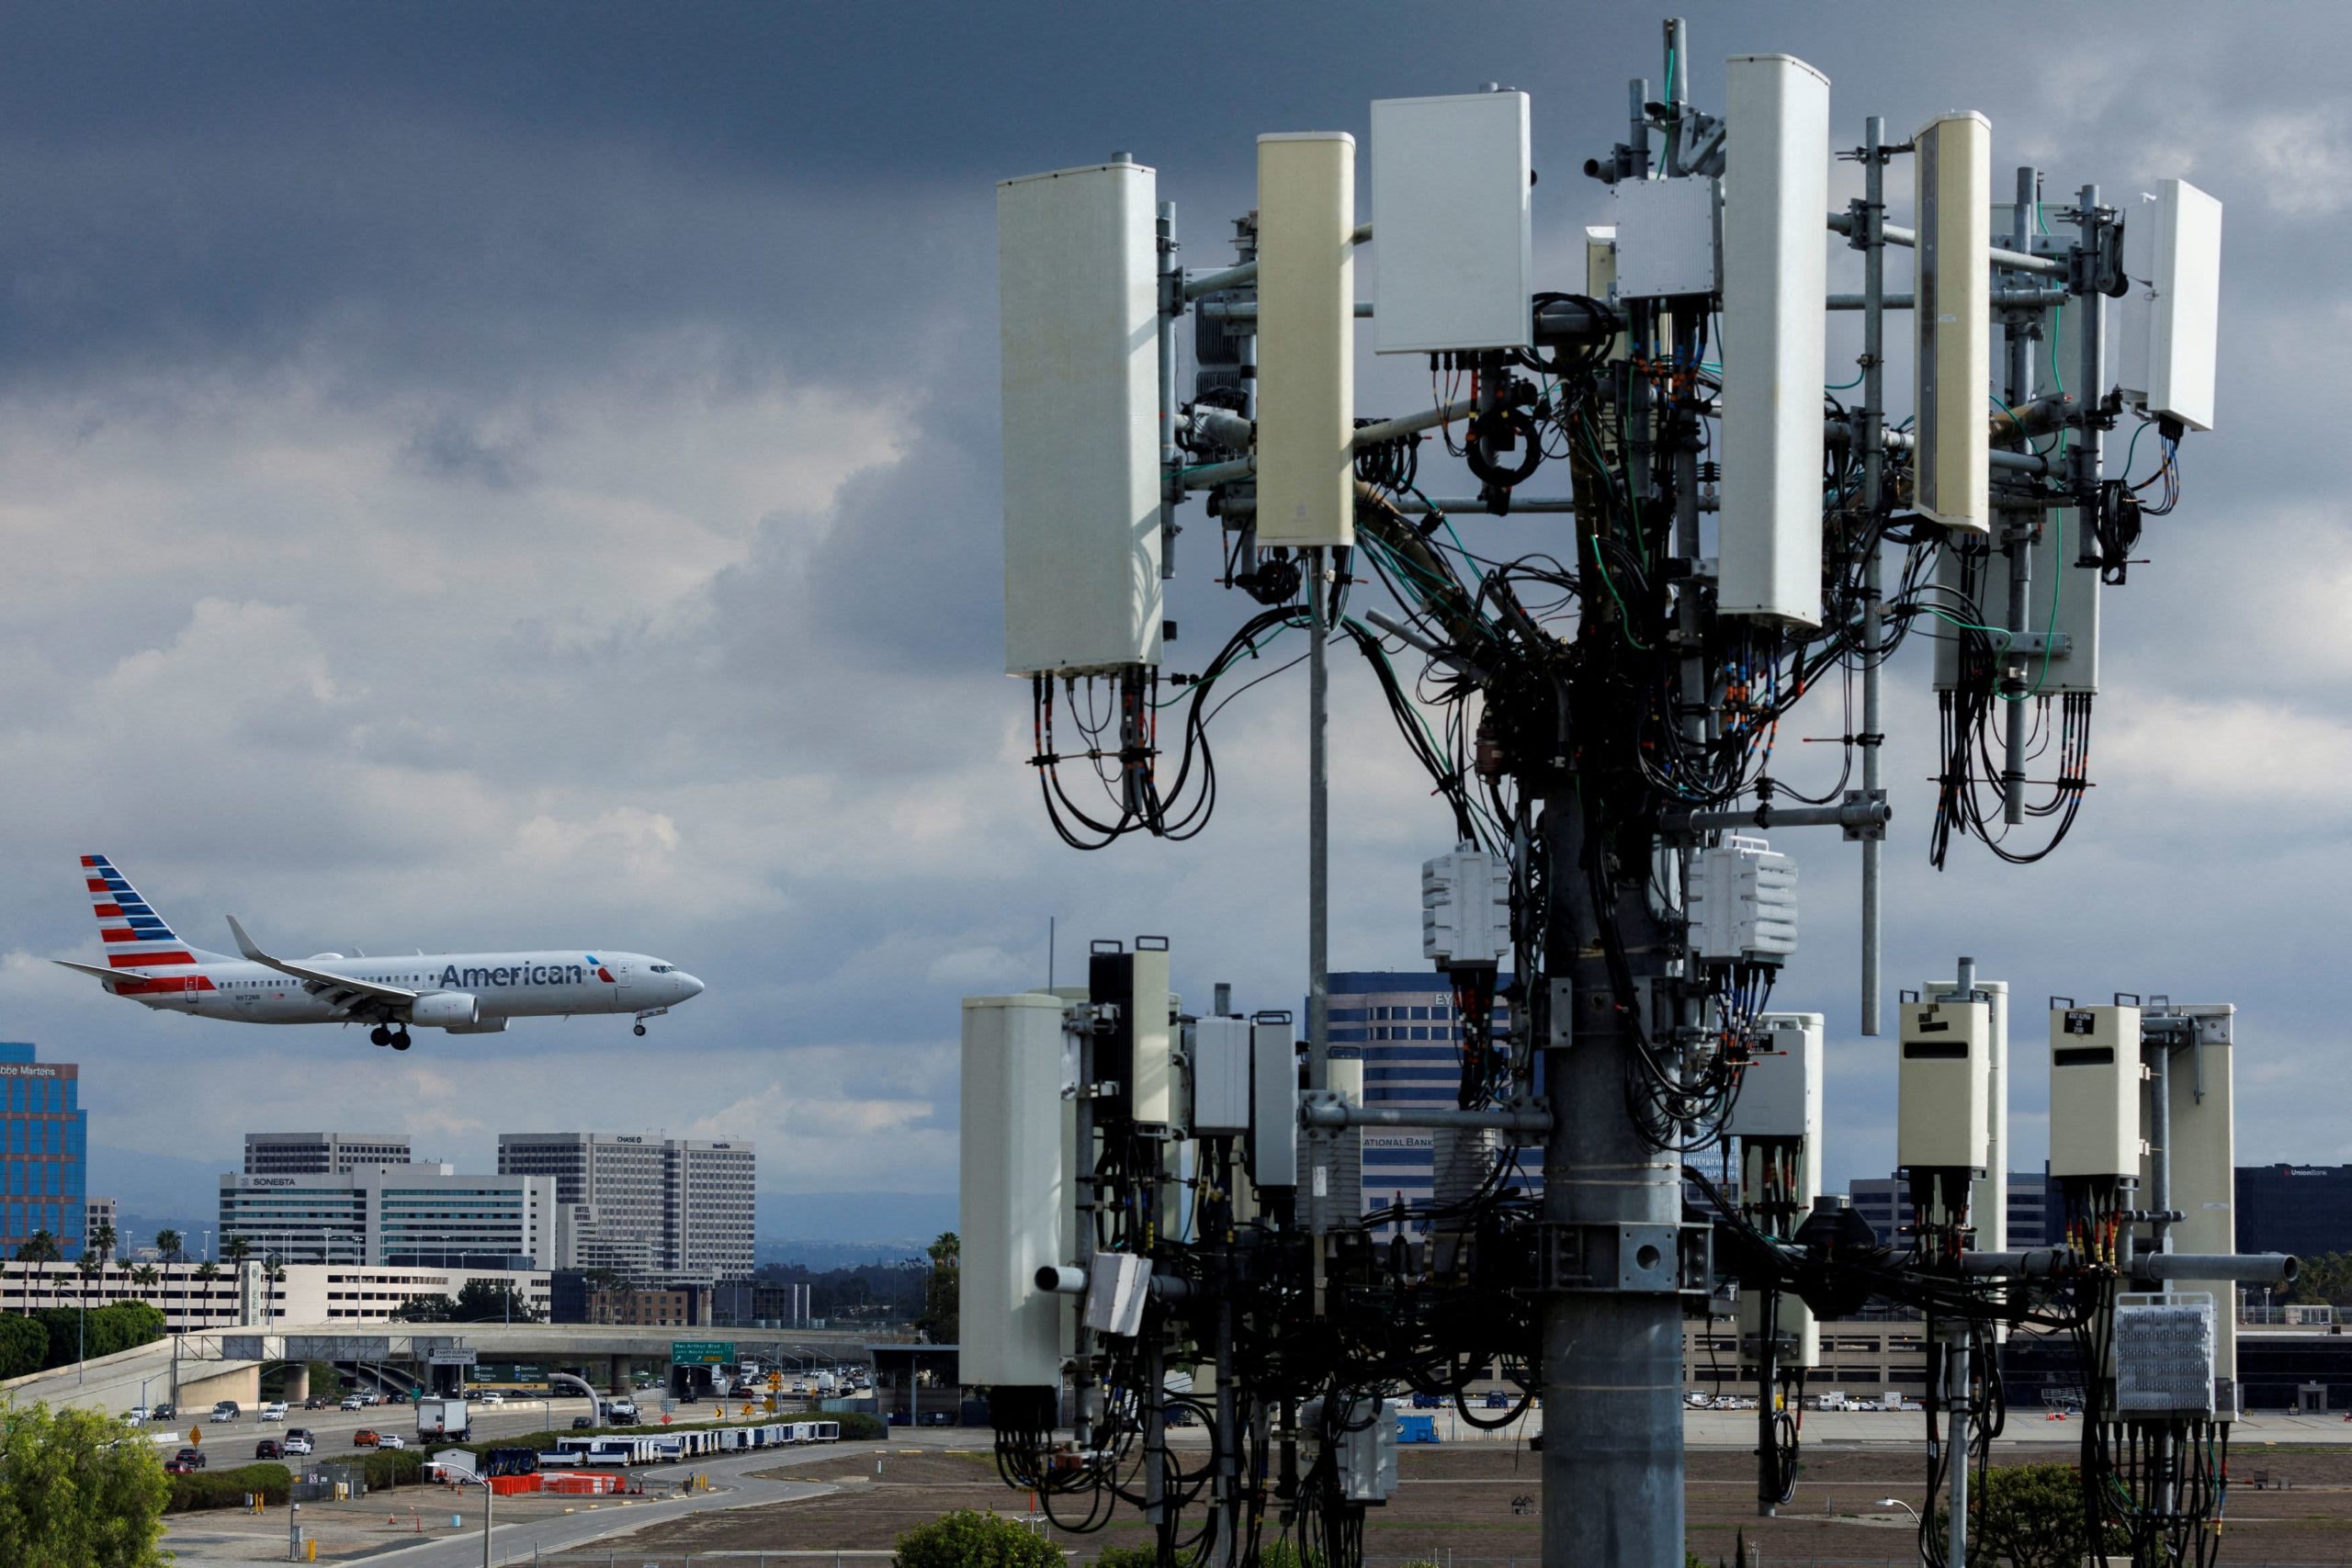 FAA warns 5G-related landing restrictions could divert flights as snow hits airports